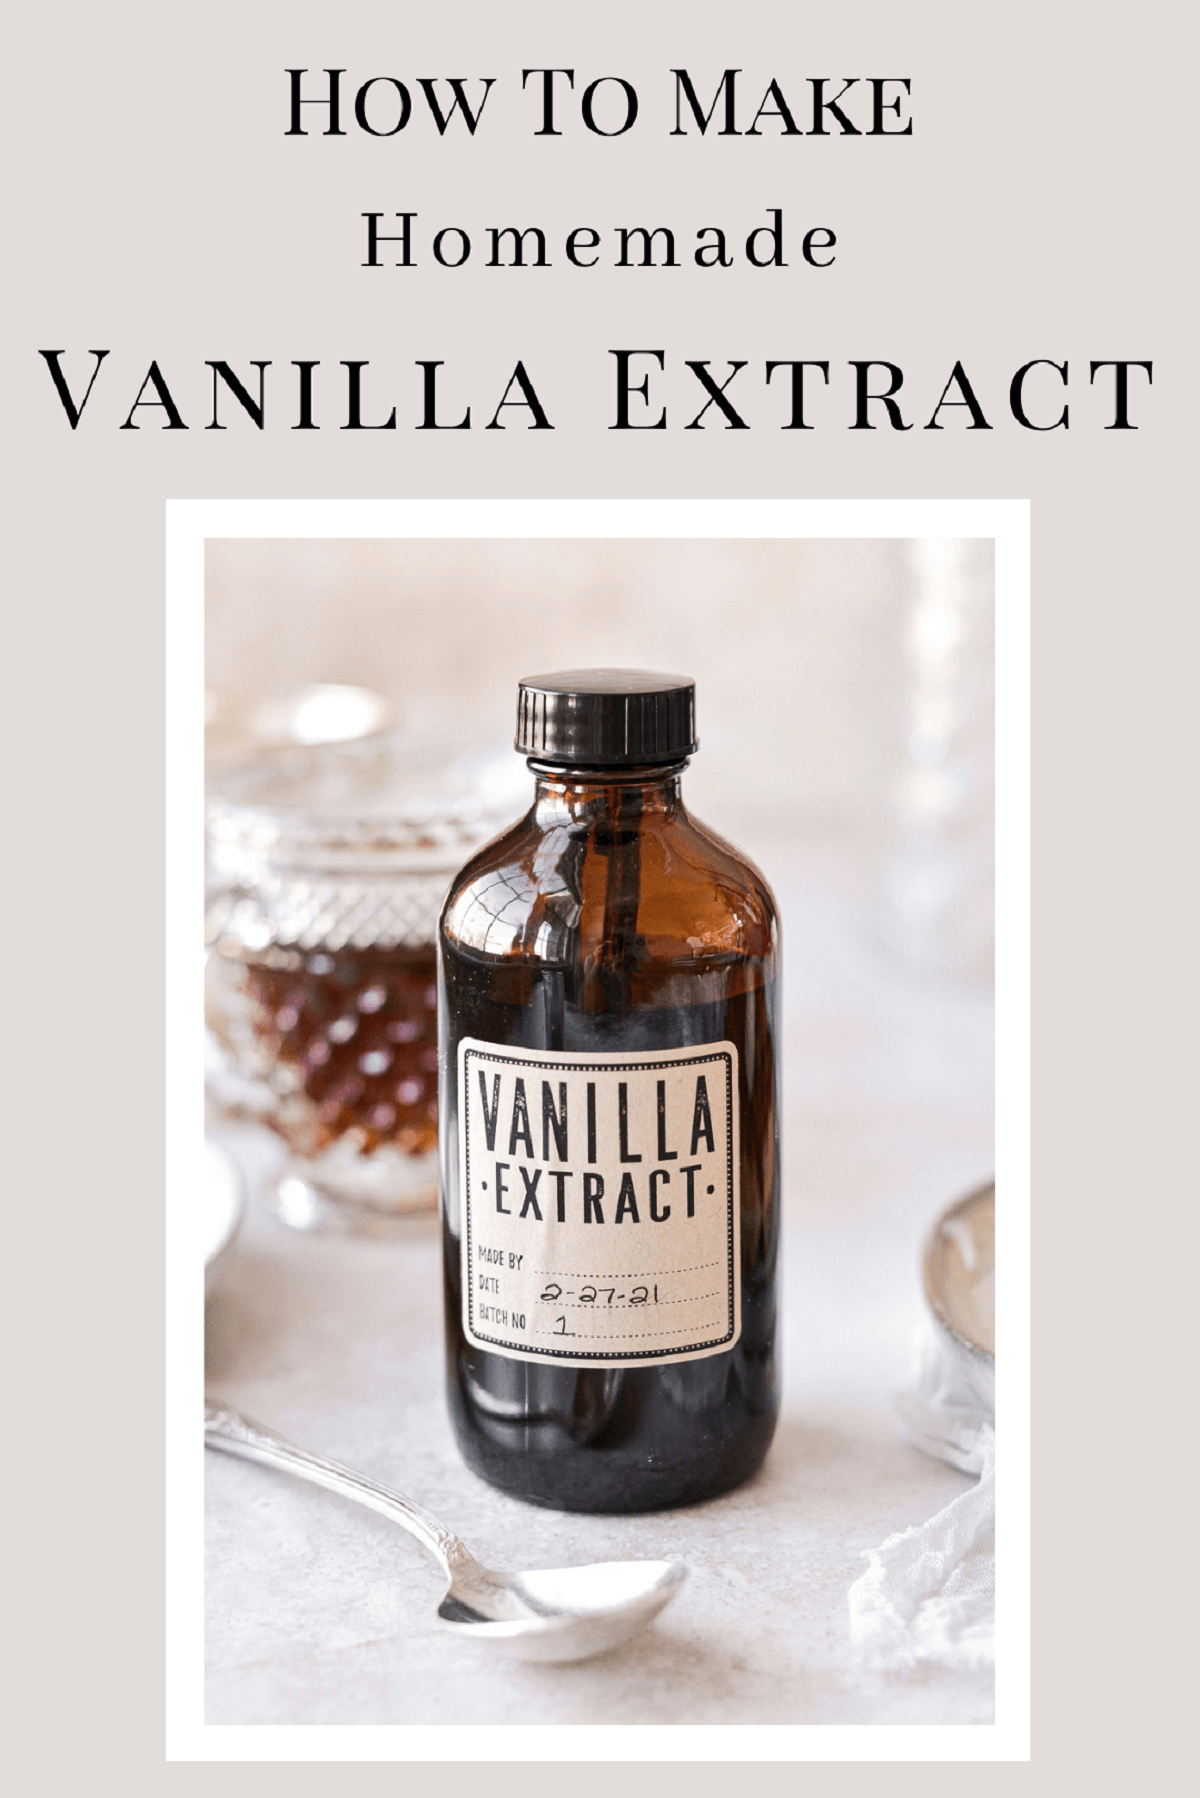 A graphic on how to make homemade vanilla extract.